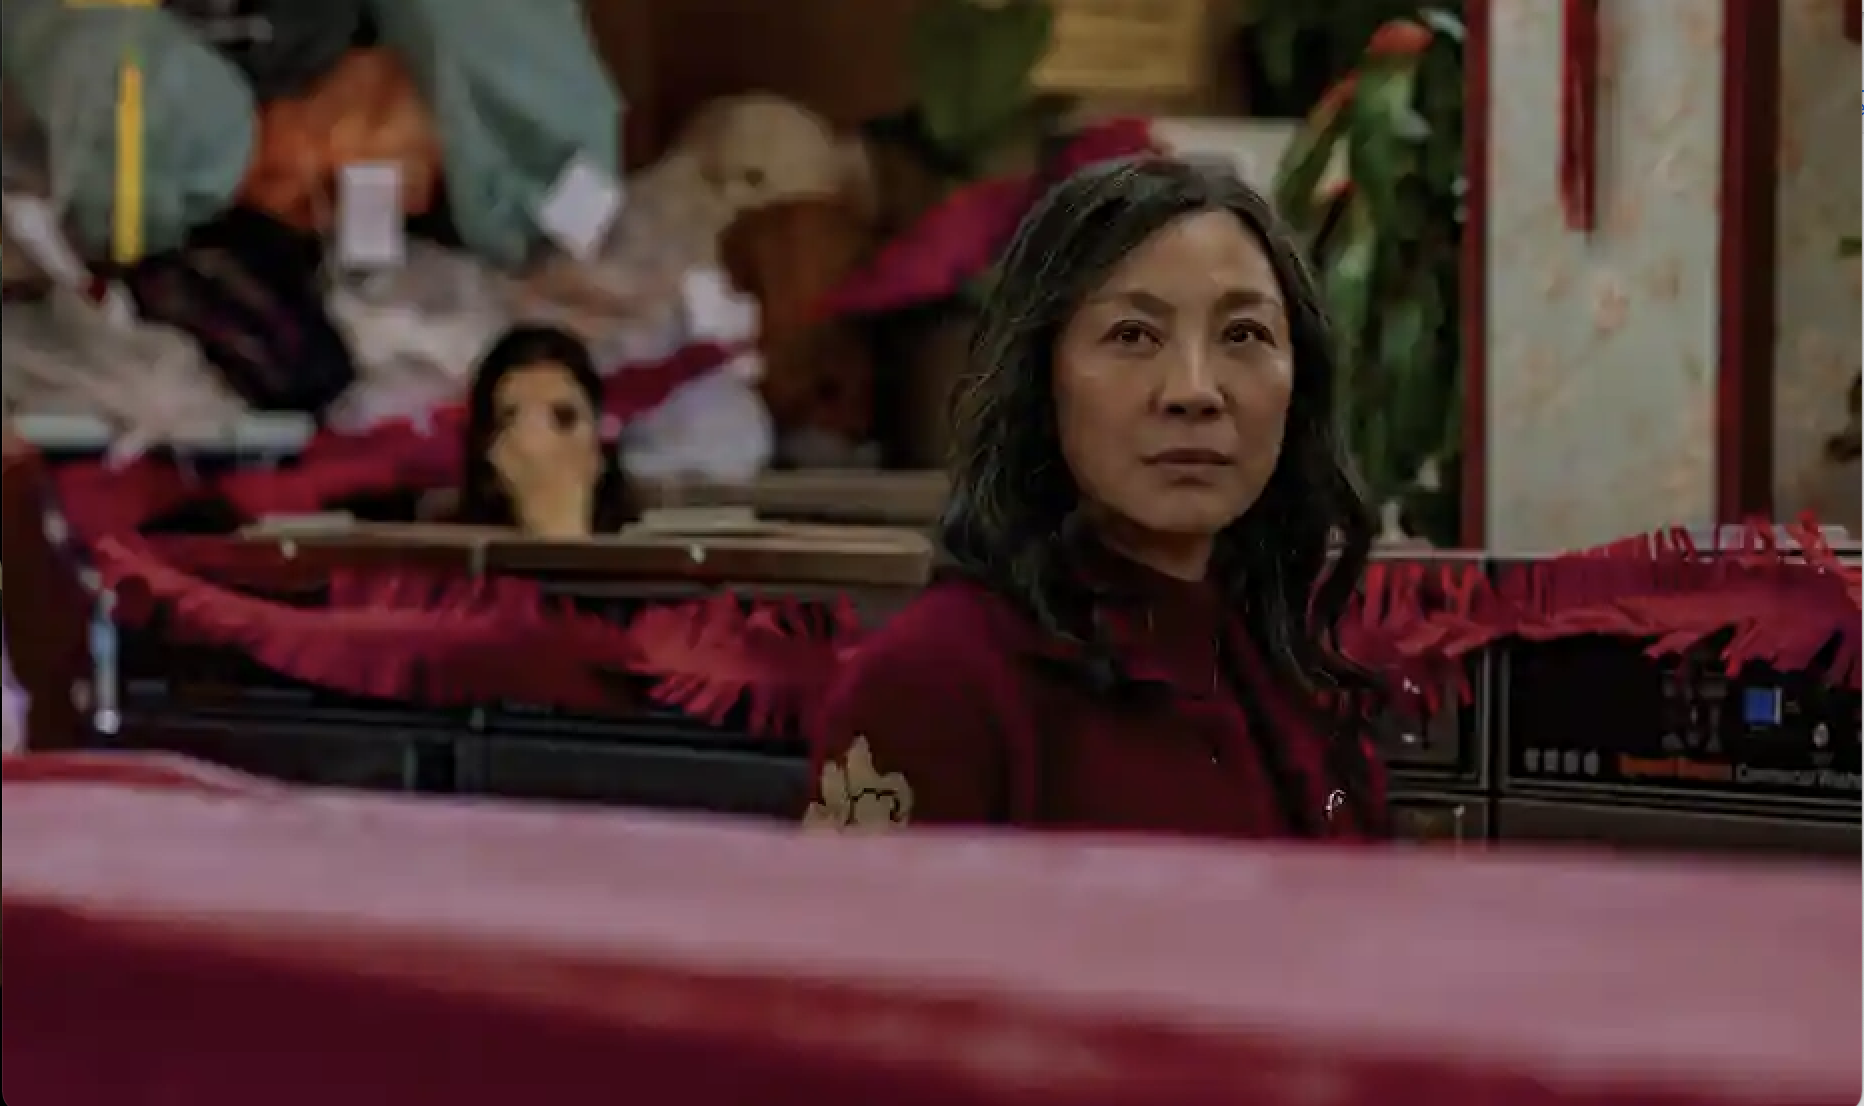 Michelle Yeoh as Evelyn looking pensively across the room